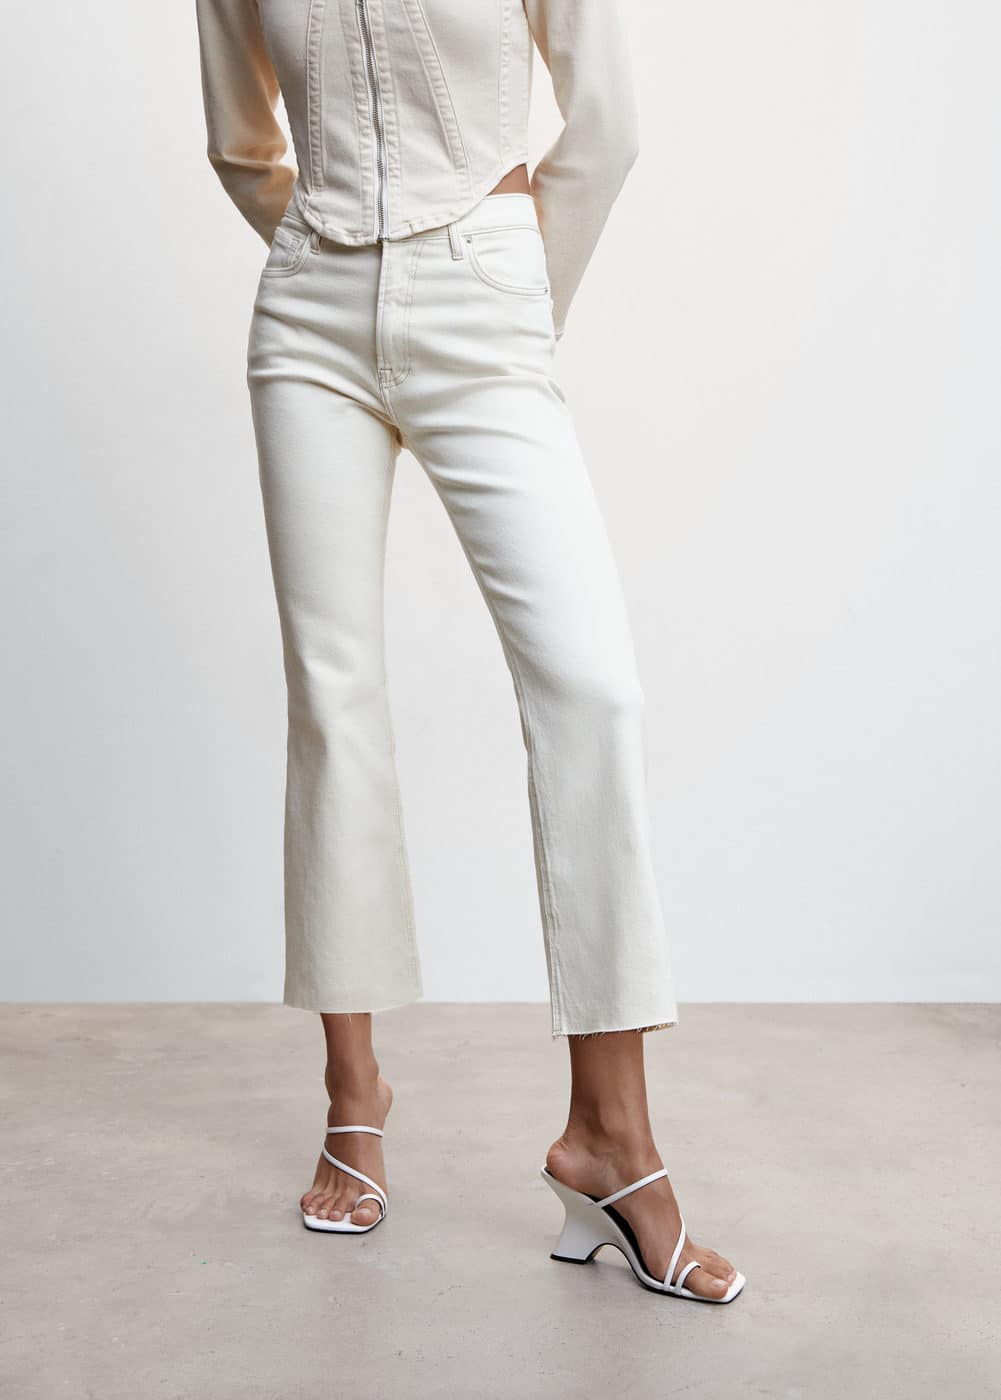 The 29 Best Cotton Jeans for Women, Period | Who What Wear